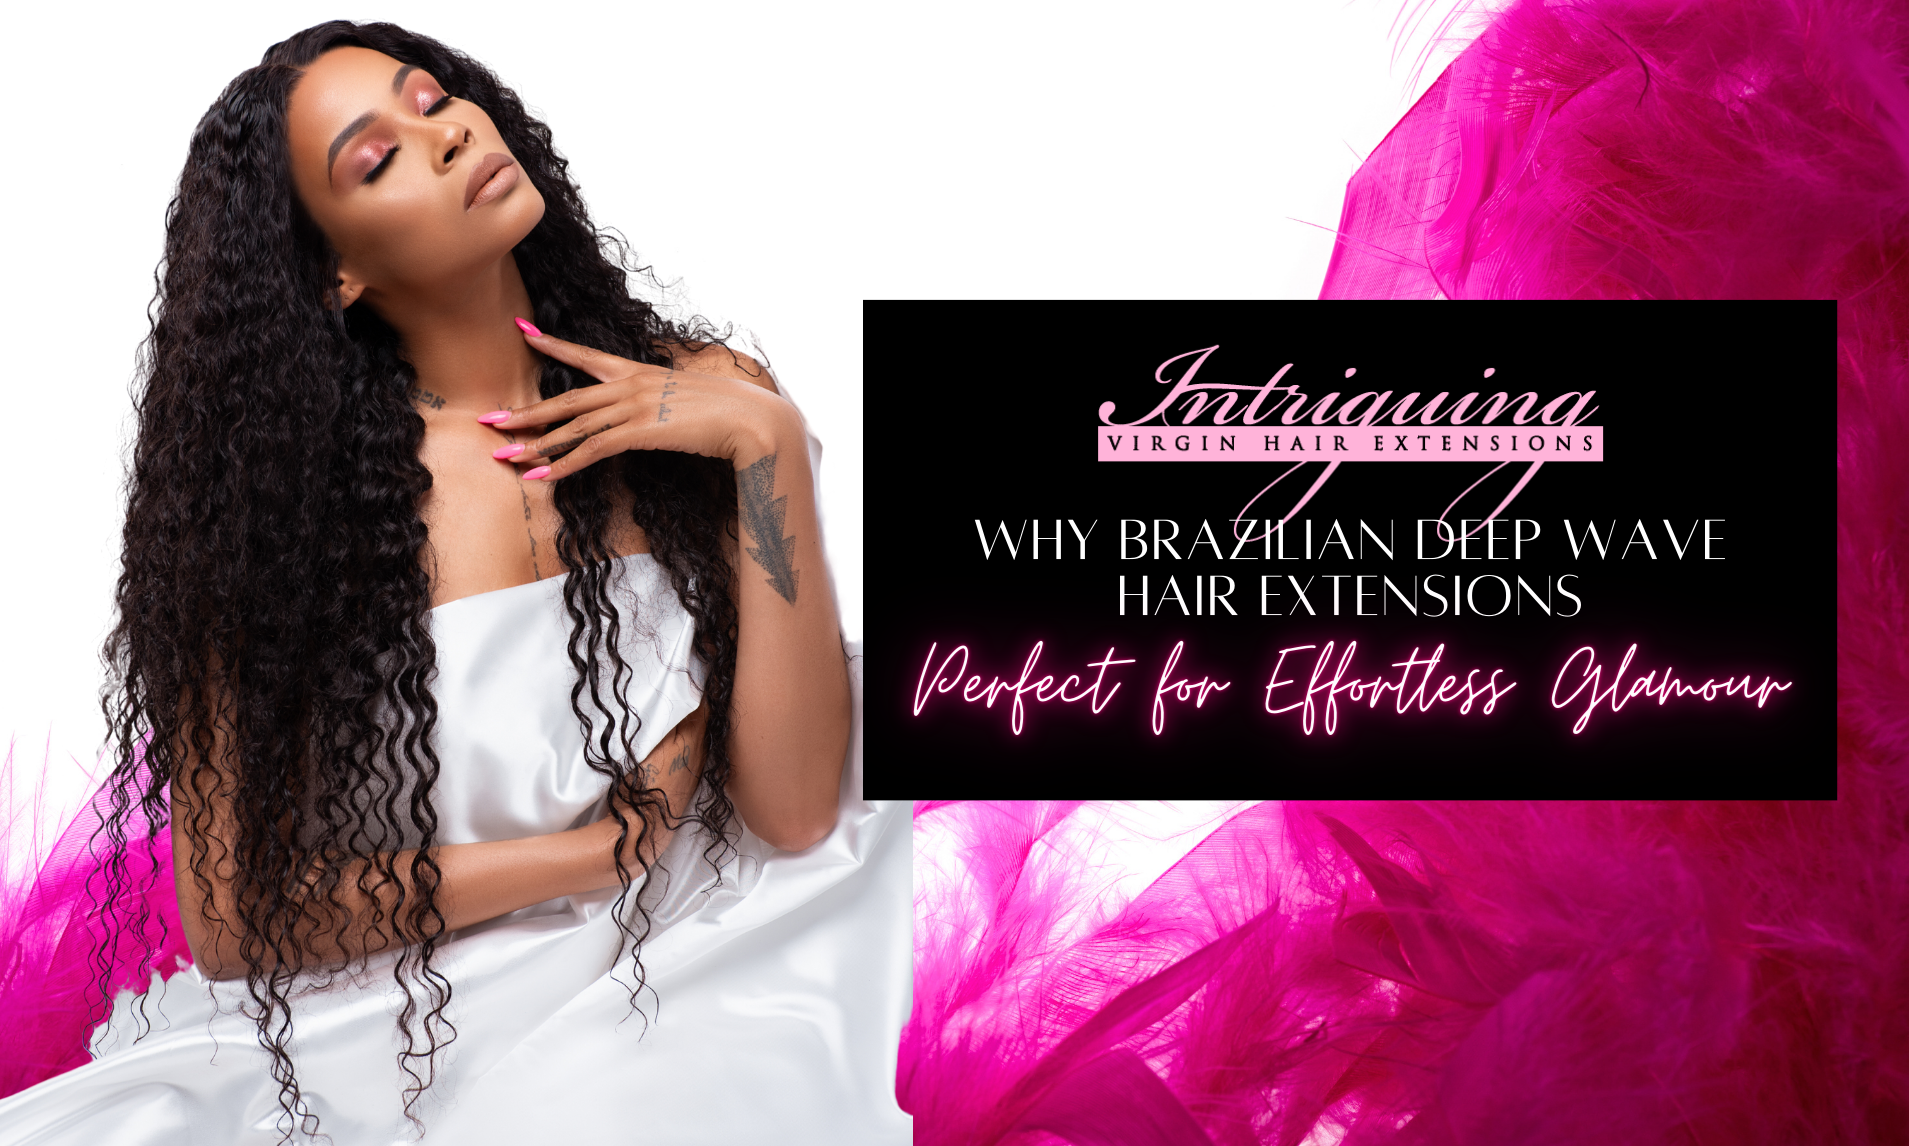 Why Brazilian Deep Wave Hair Extensions Are Perfect for Effortless Glamour